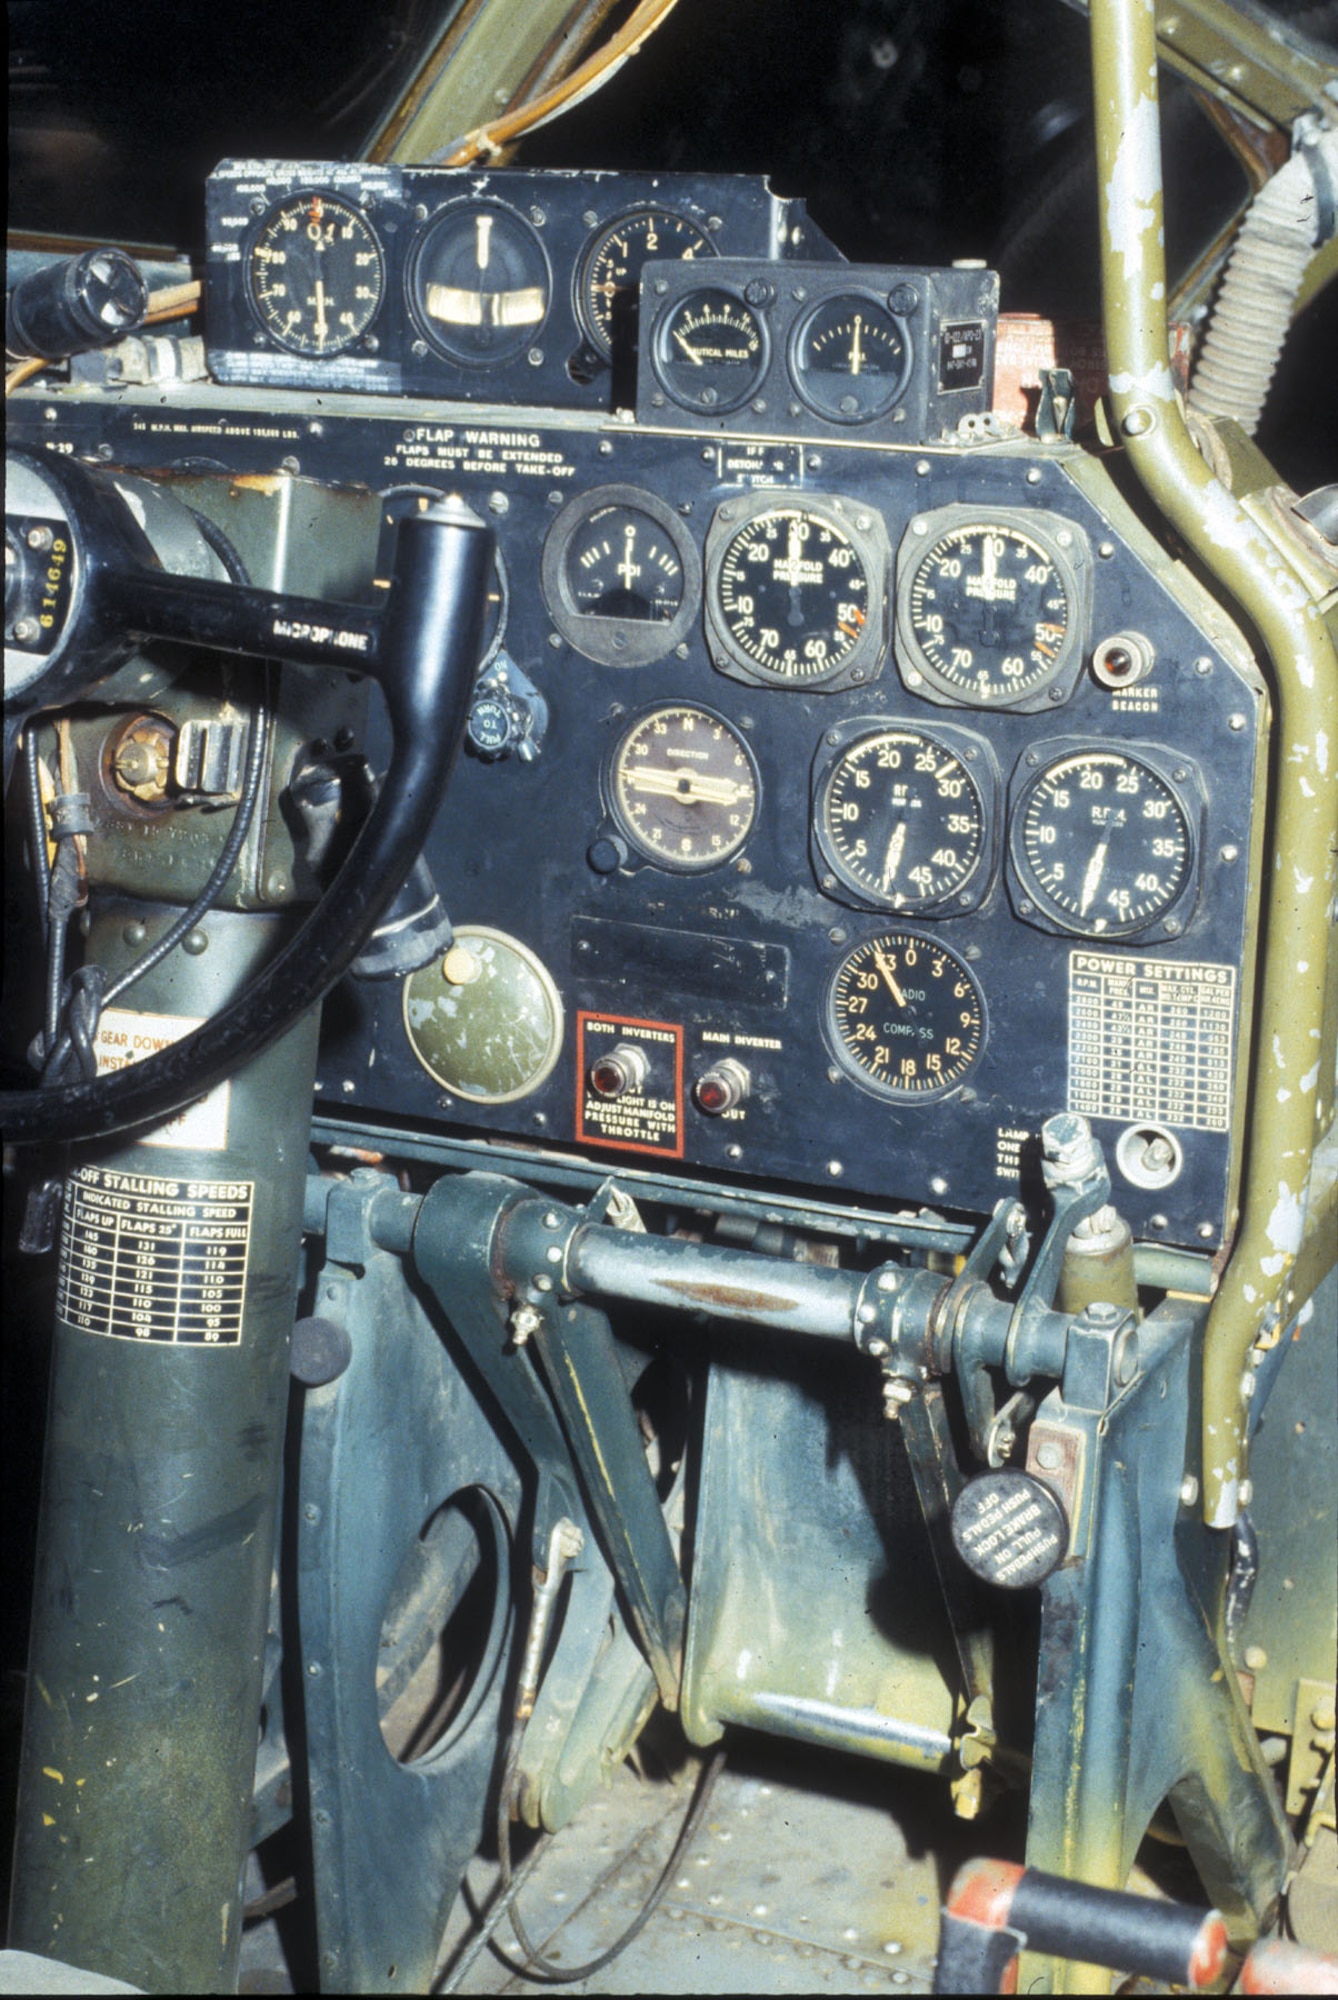 DAYTON, Ohio - Boeing B-29 "Bockscar" cockpit at the National Museum of the U.S. Air Force. (U.S. Air Force photo)